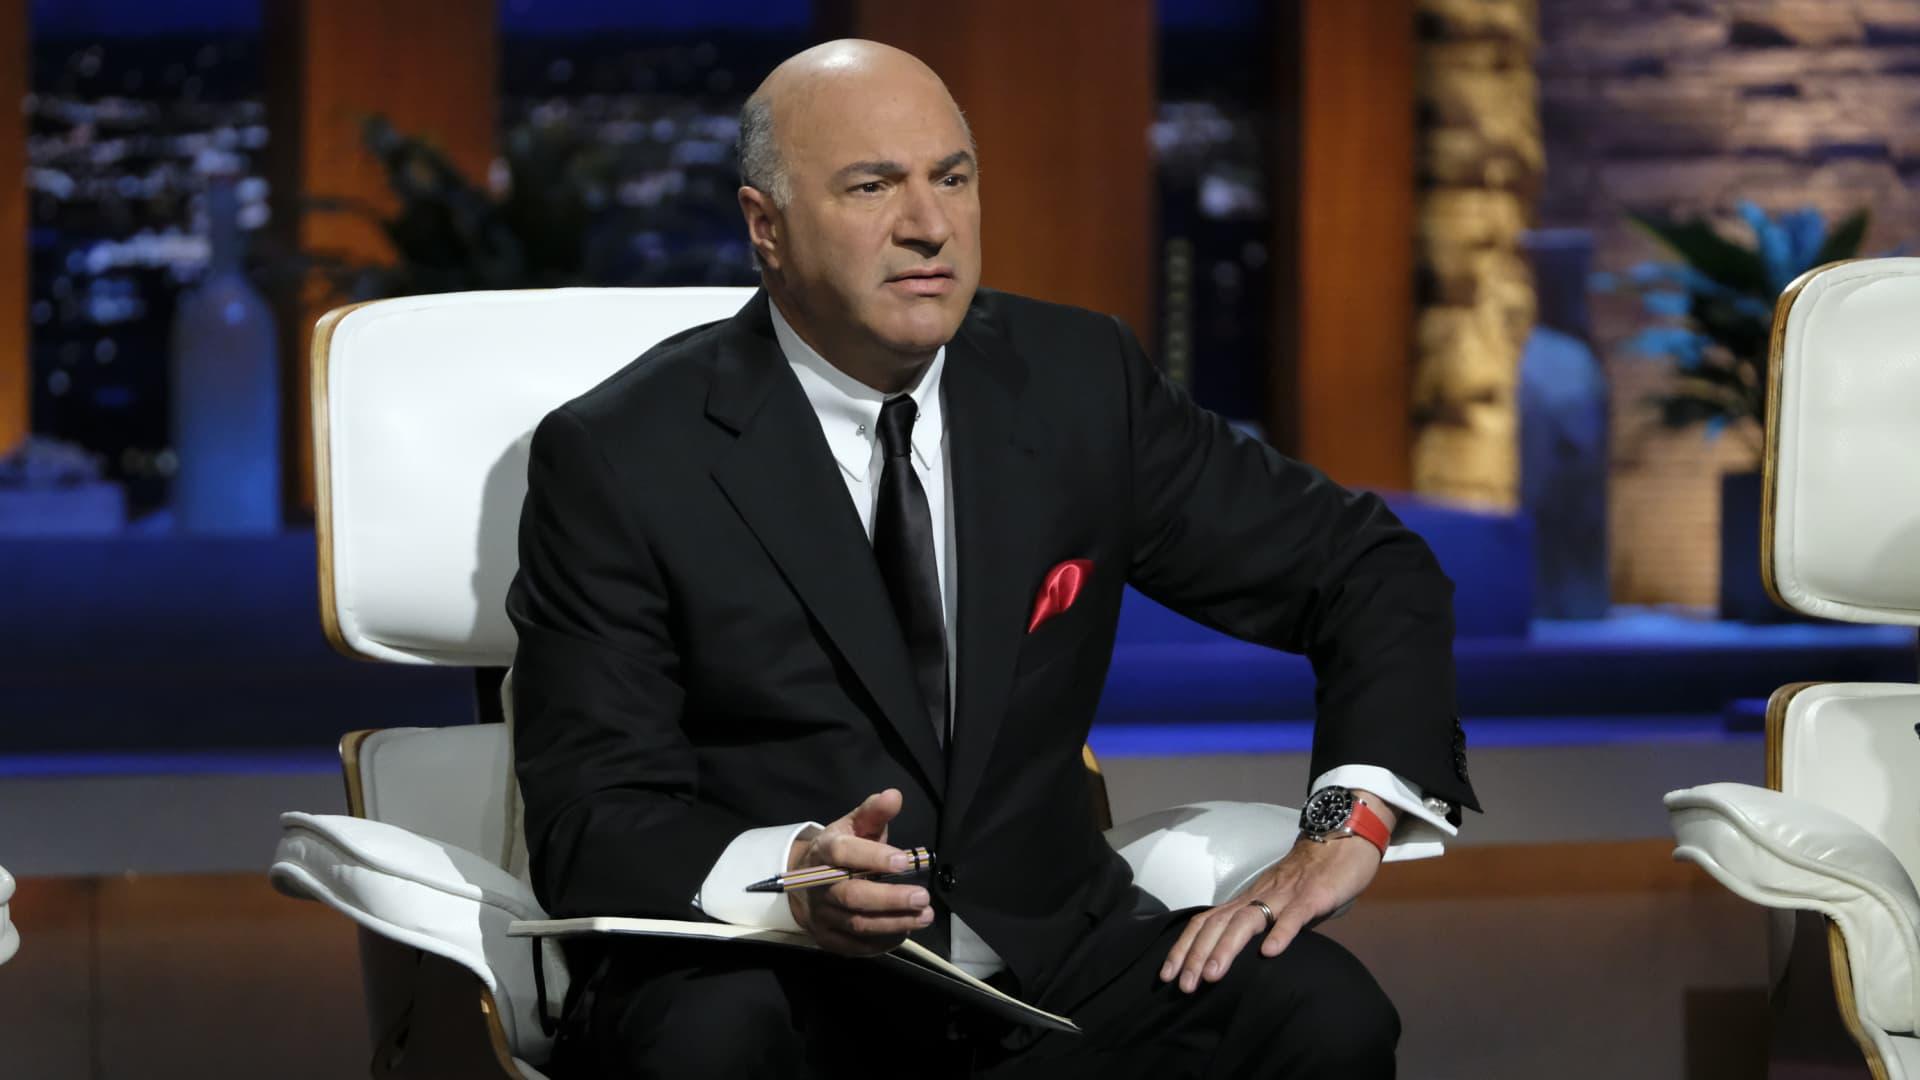 Kevin Oleary: O'Leary's Investing Philosophy and Media Presence